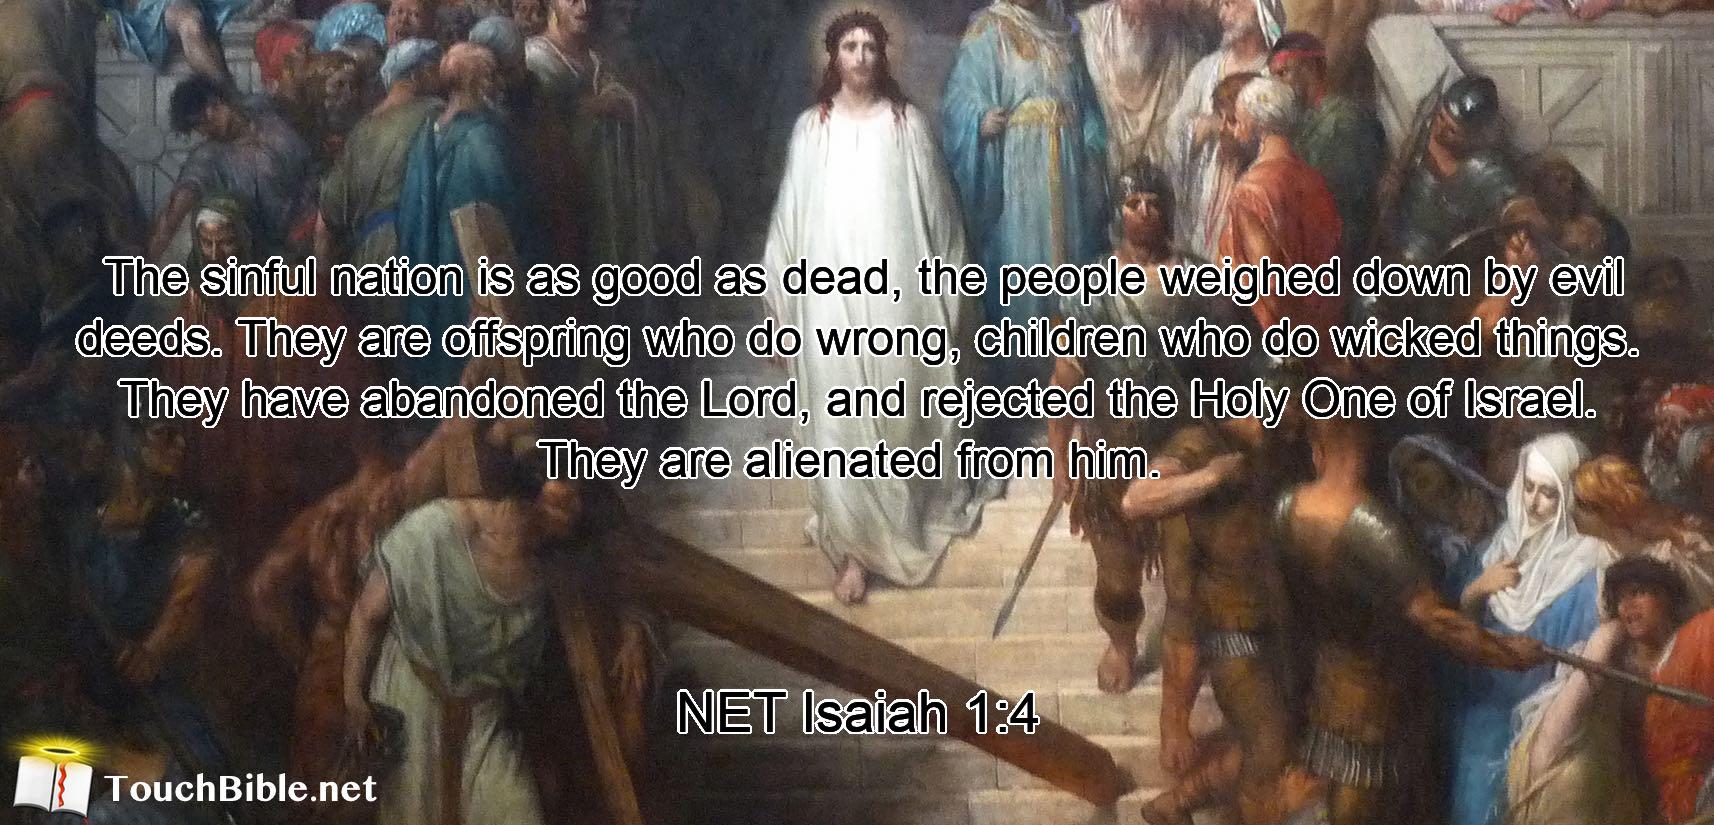  The sinful nation is as good as dead,  the people weighed down by evil deeds. They are offspring who do wrong, children  who do wicked things. They have abandoned the Lord, and rejected the Holy One of Israel.  They are alienated from him. 